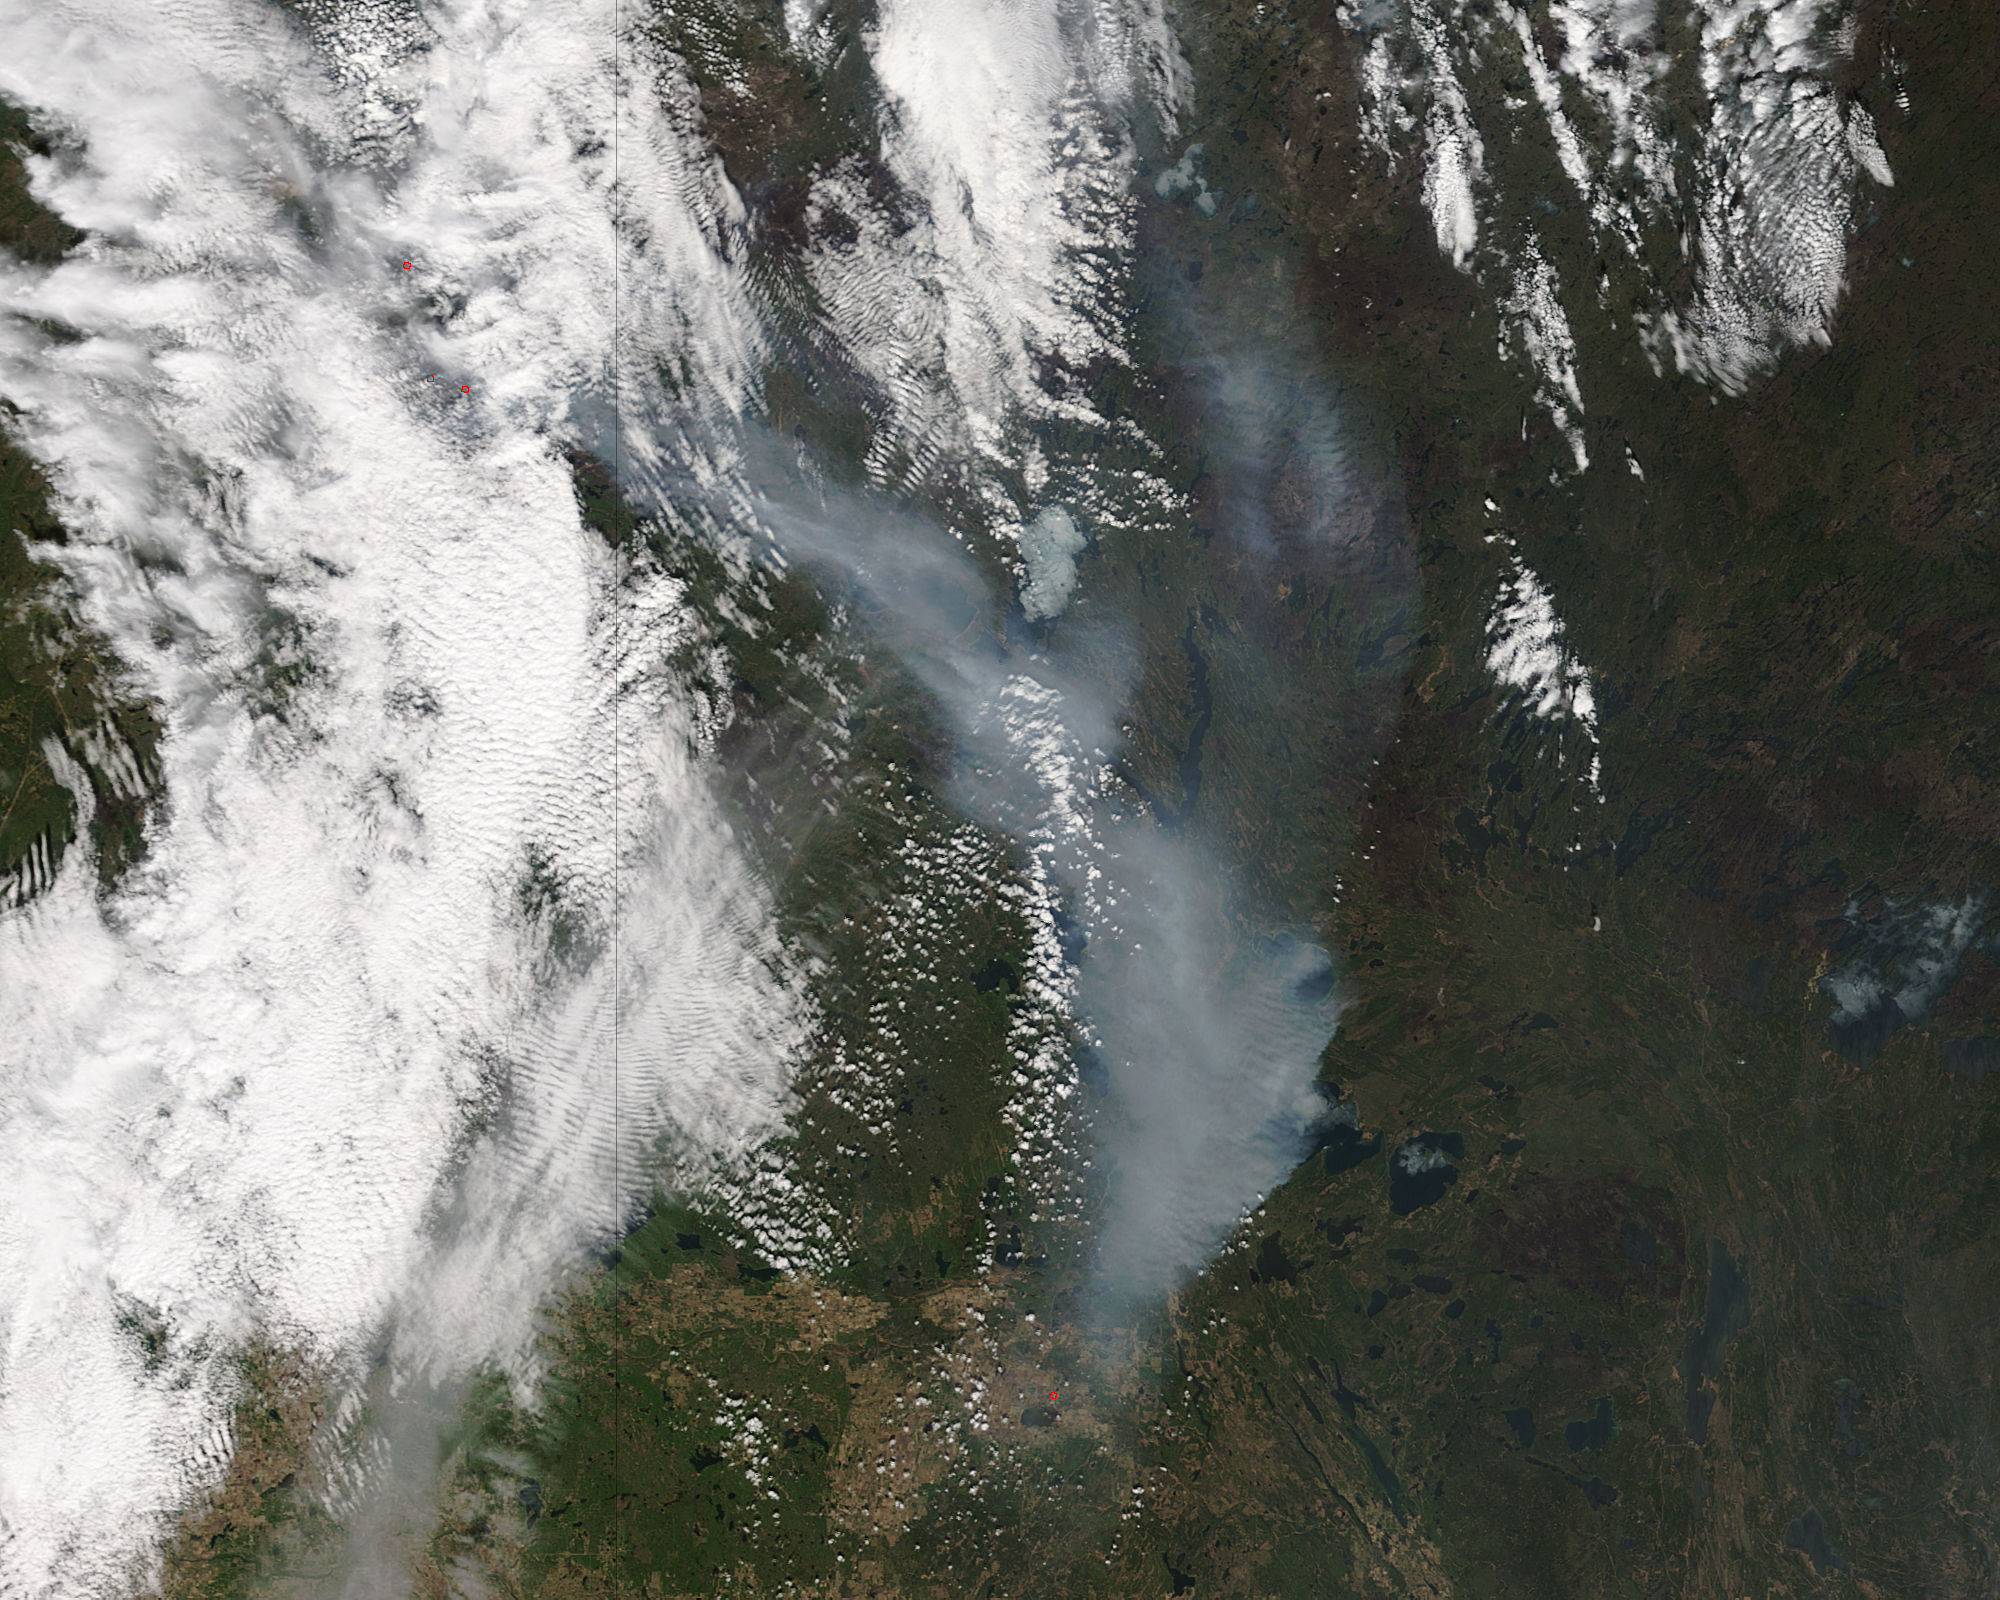 On May 8, 2016, the MODIS instrument on the Terra satellite captured this image of Ft. McMurray Fire in Alberta, Canada.<br />
[NASA Goddard MODIS Rapid Response Team]